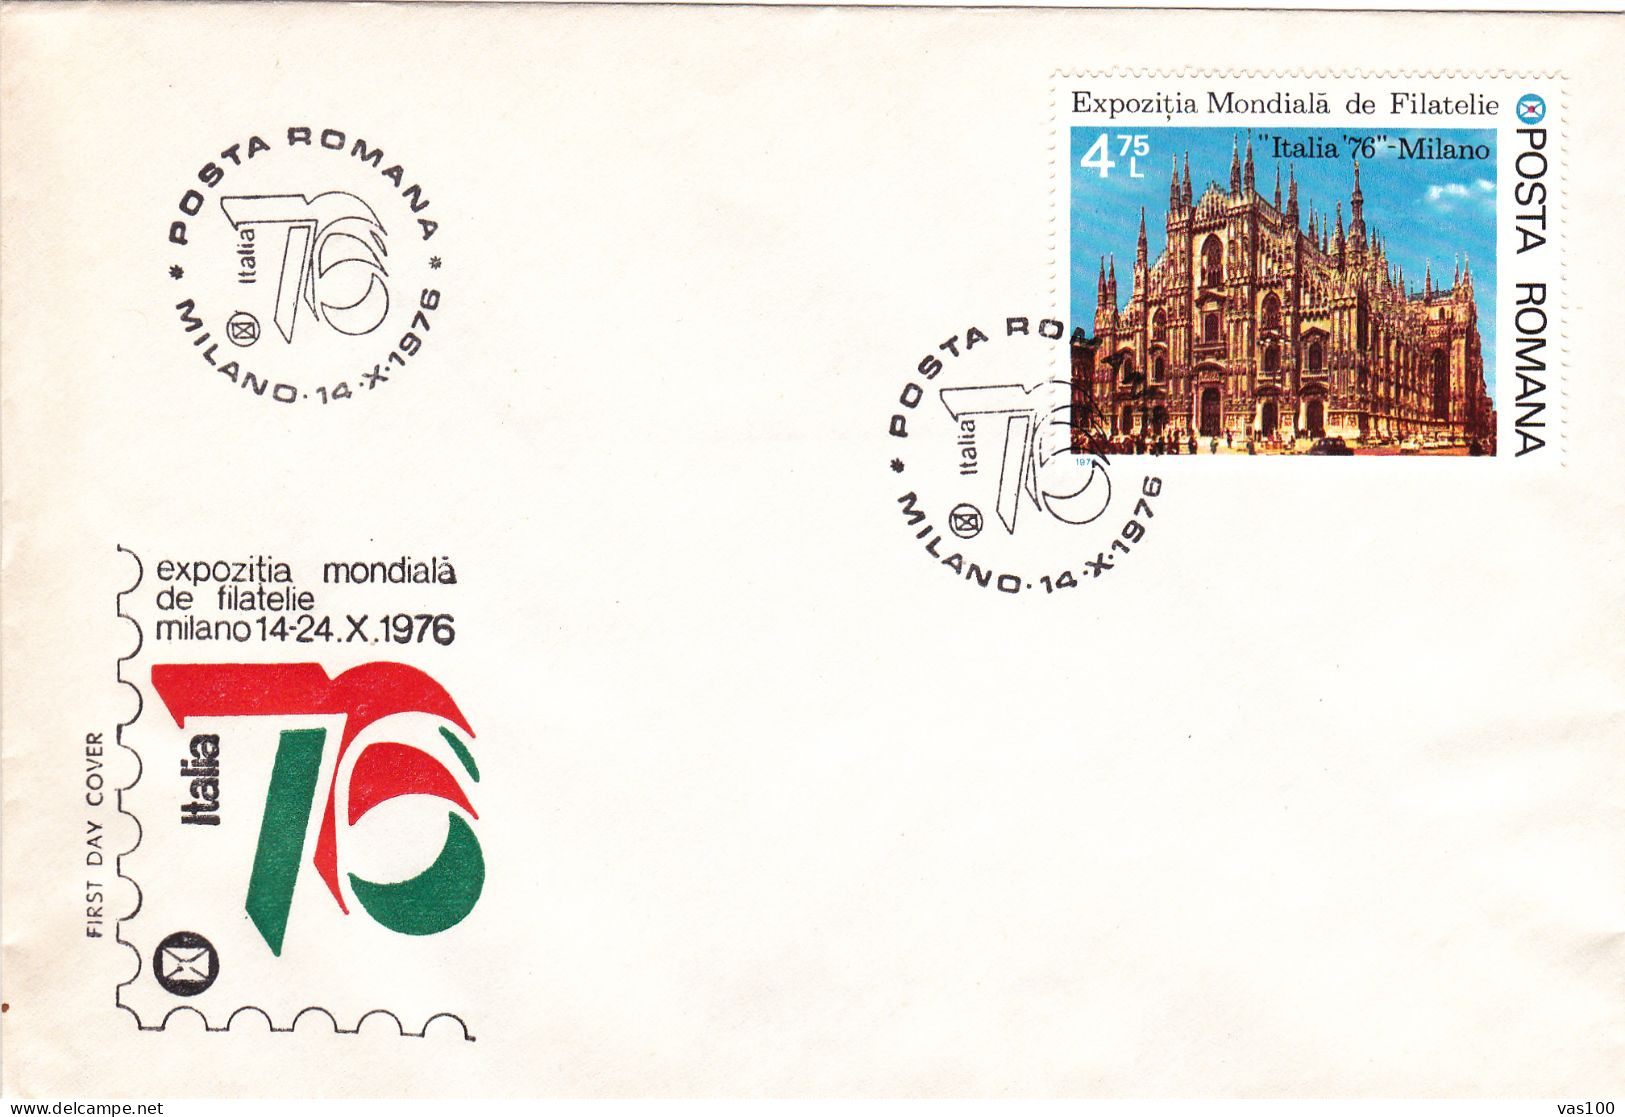 WORLD PHILATEL EXHIBITION MILAN 1976 COVERS FDC - FDC